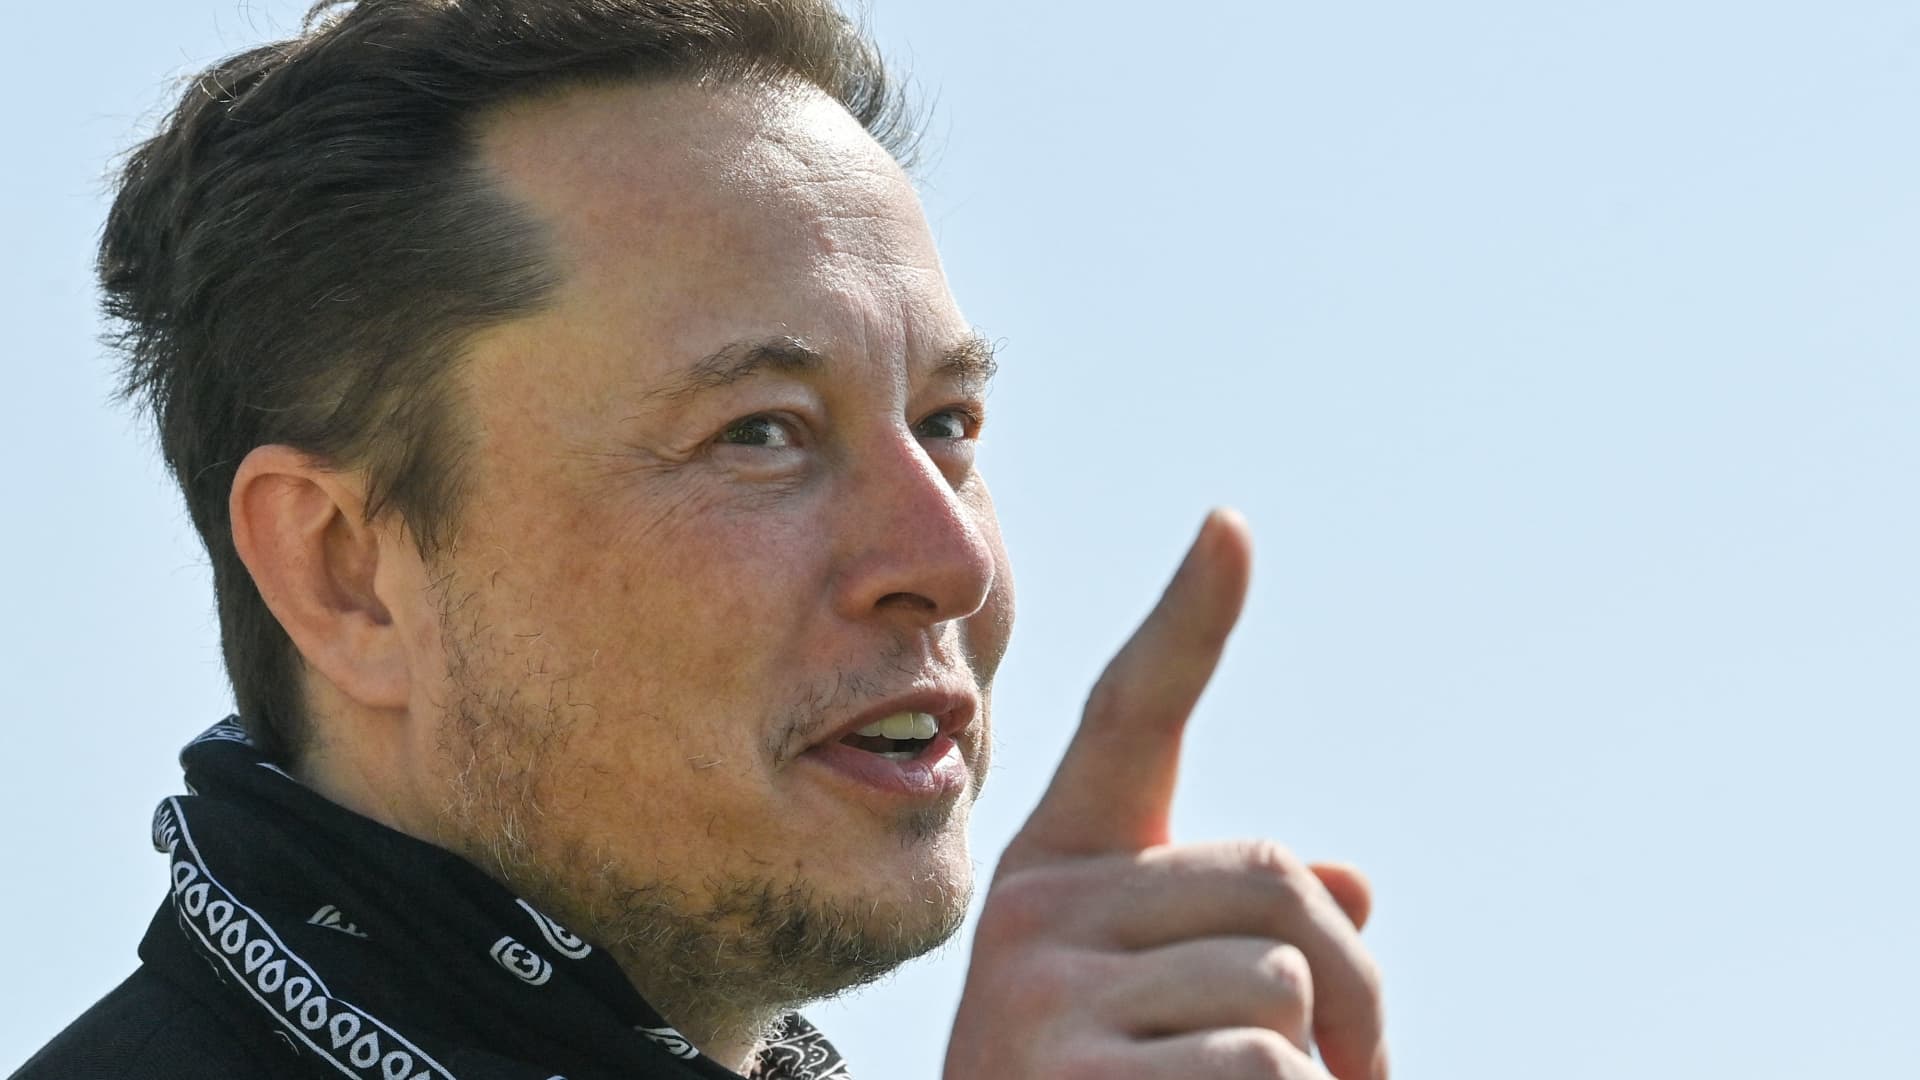 Entrepreneur and business magnate Elon Musk gestures during a visit at the Tesla Gigafactory plant under construction, on August 13, 2021 in Gruenheide near Berlin, eastern Germany.